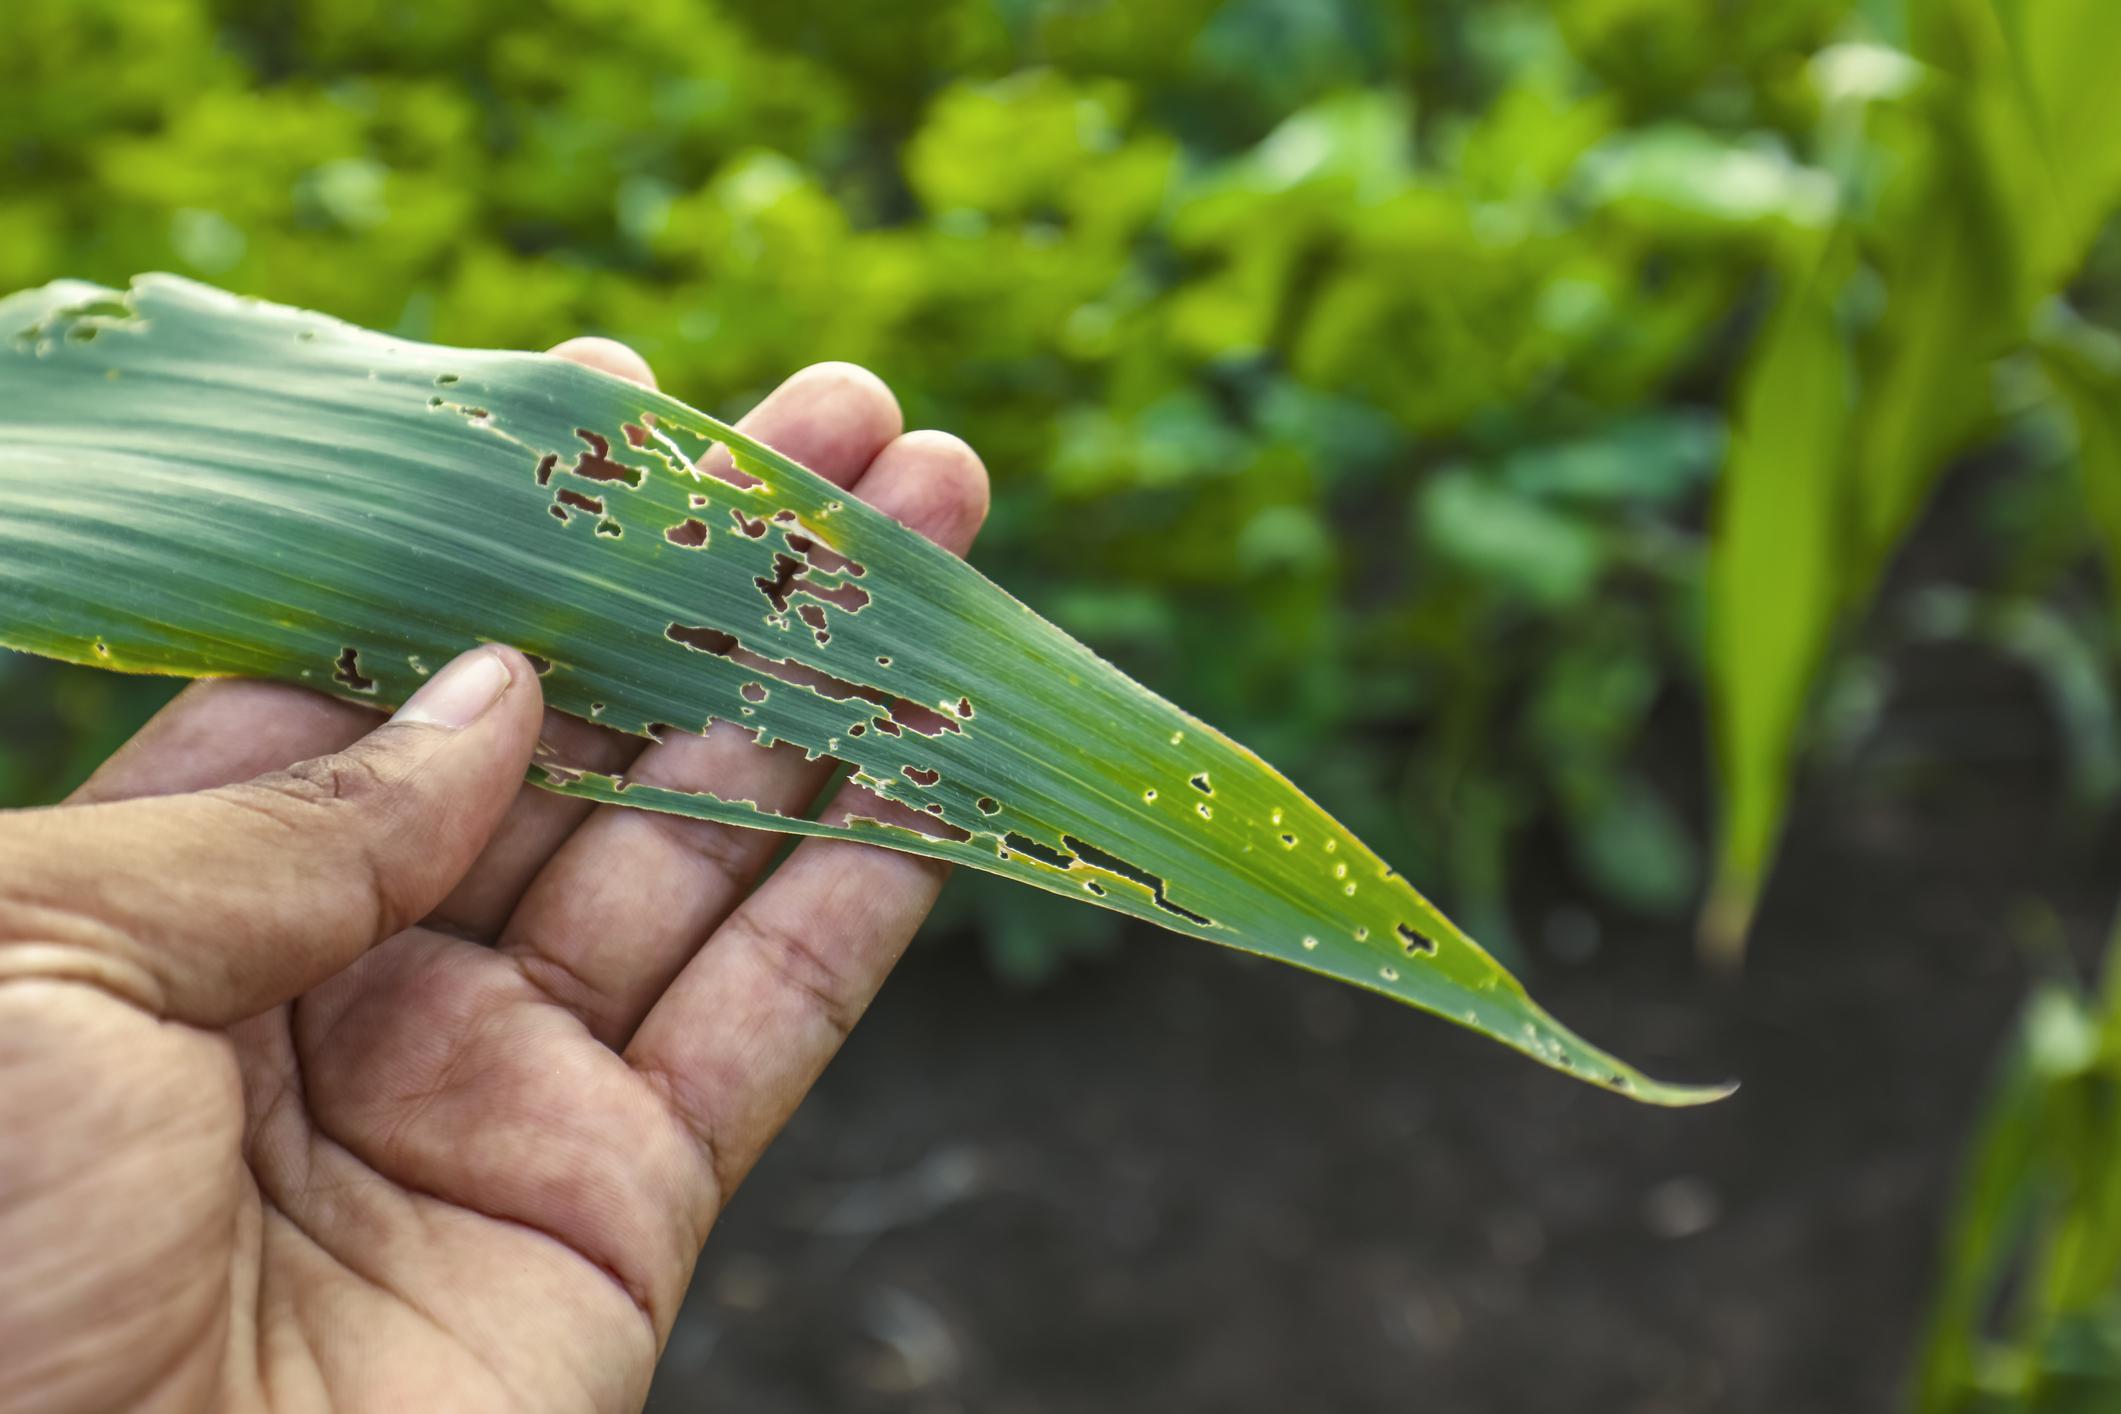 Common Crop Pests & Why You Should Take Action if You See One